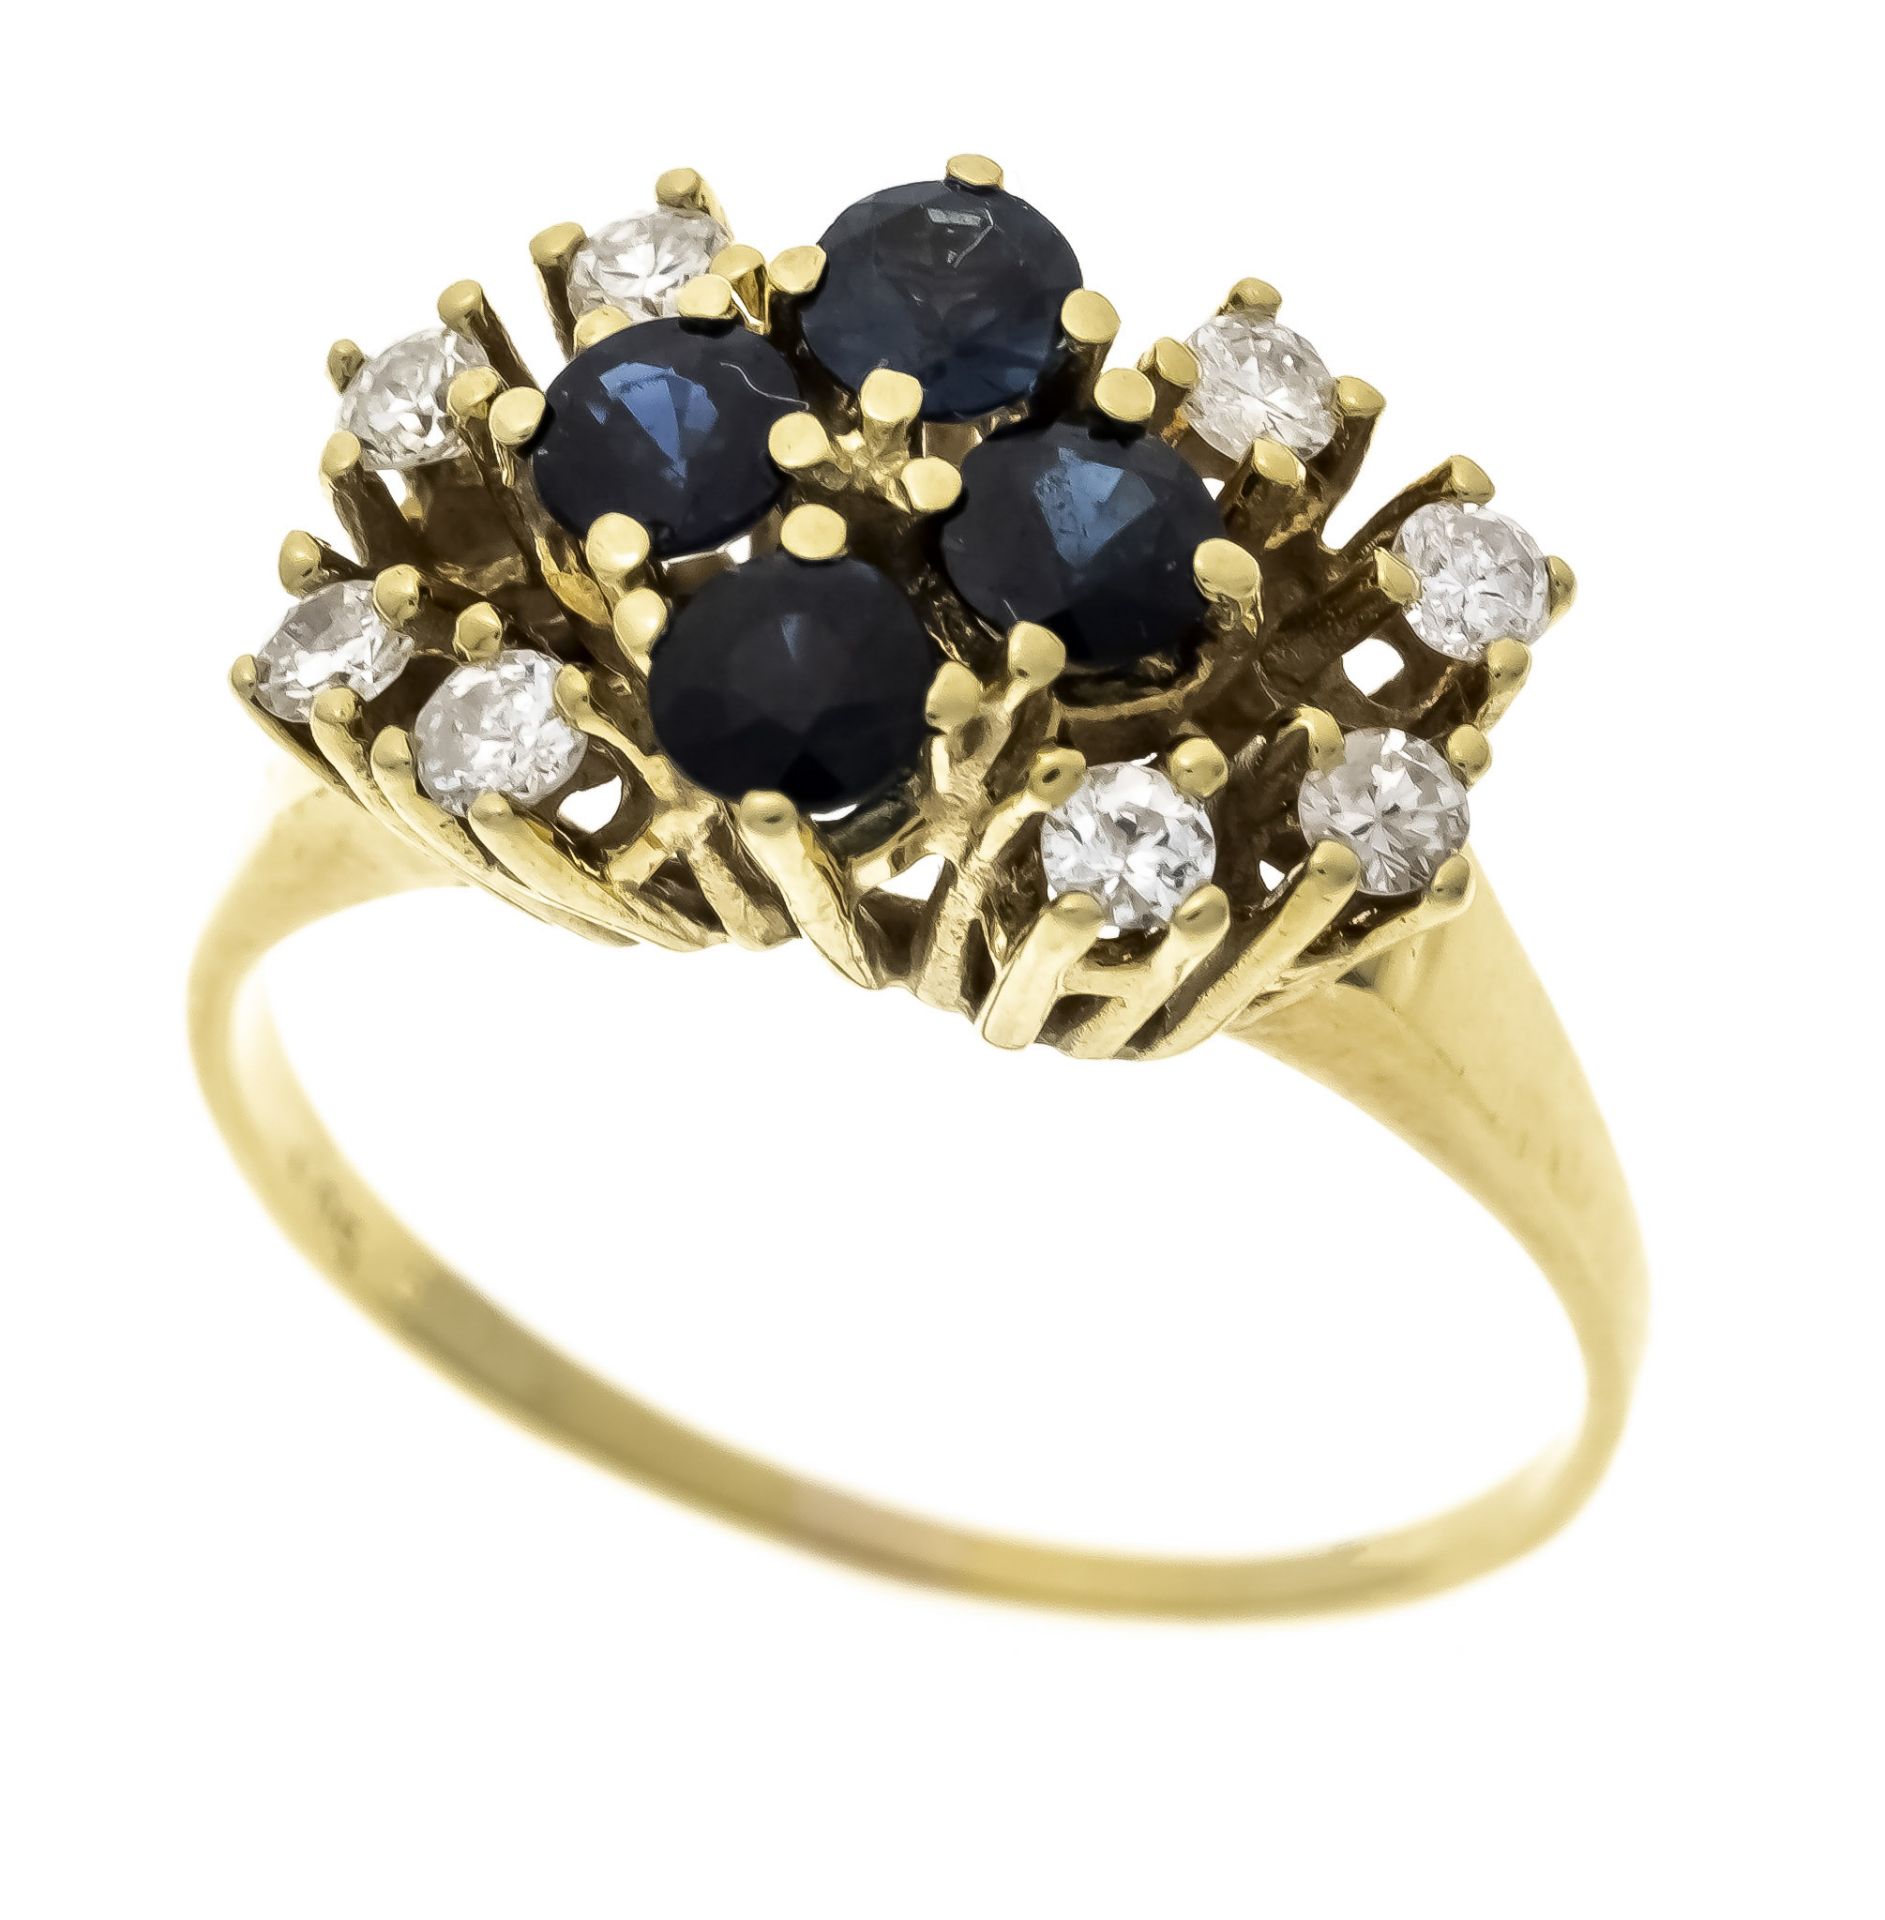 Sapphire diamond ring GG 585/000 with 4 round faceted sapphires 3.2 mm dark blue, translucent and